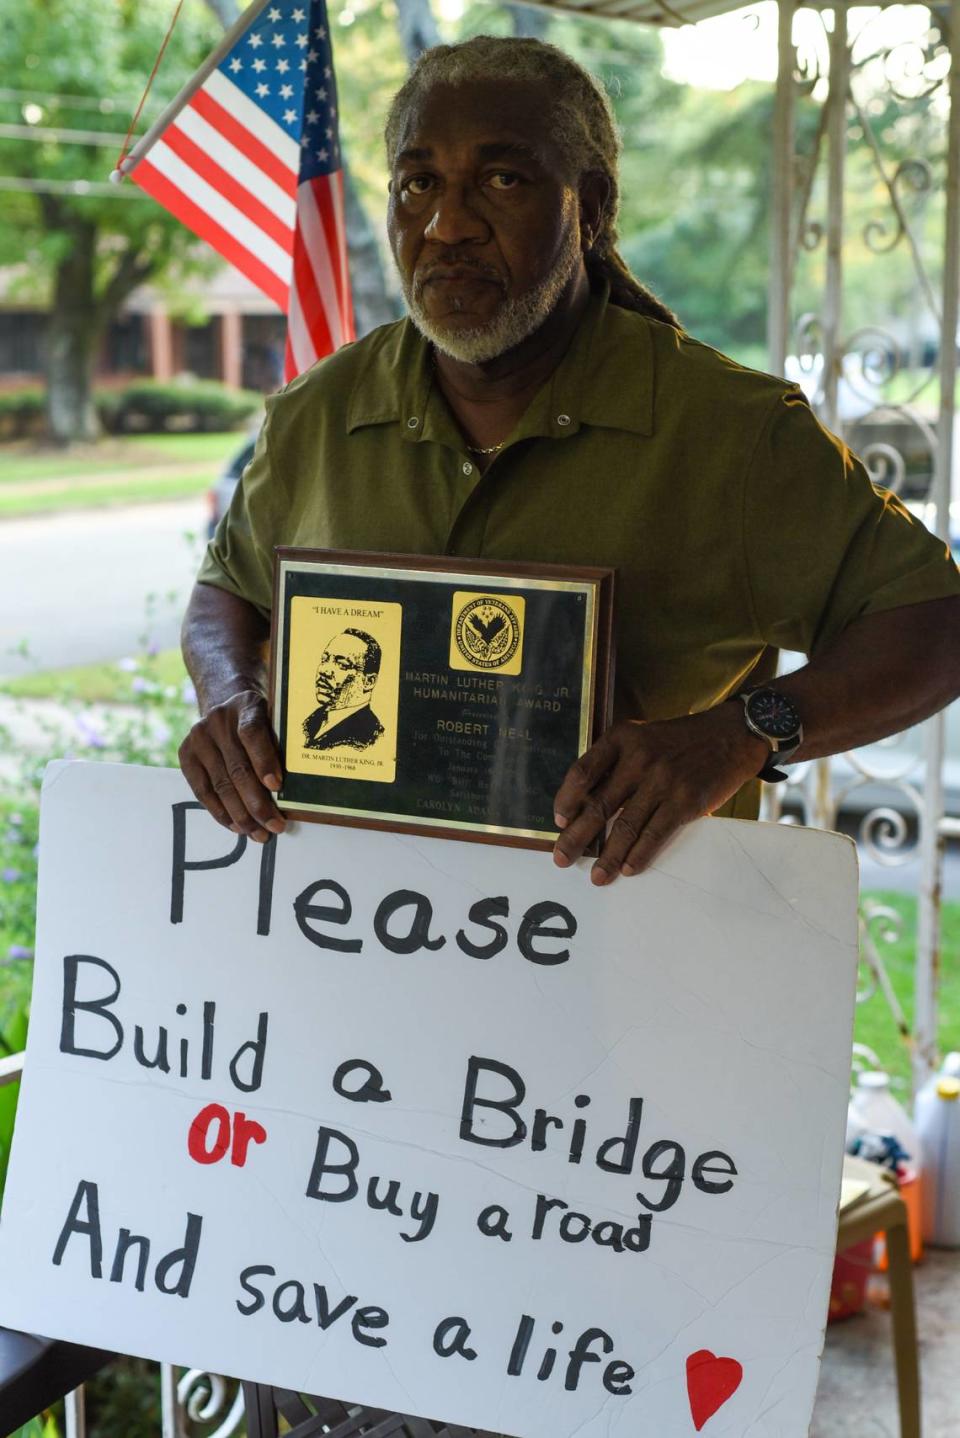 Robert Neal, 69, holds a sign reading “Please Build a Bridge or Buy a road And save a life” outside his home in the historically Black Logan neighborhood in Concord, N.C., on Friday, Aug. 25. 2023. The Lincoln Street Bridge, blocks away from the city-owned unit where three children died in a fire, has been closed for more than a year.